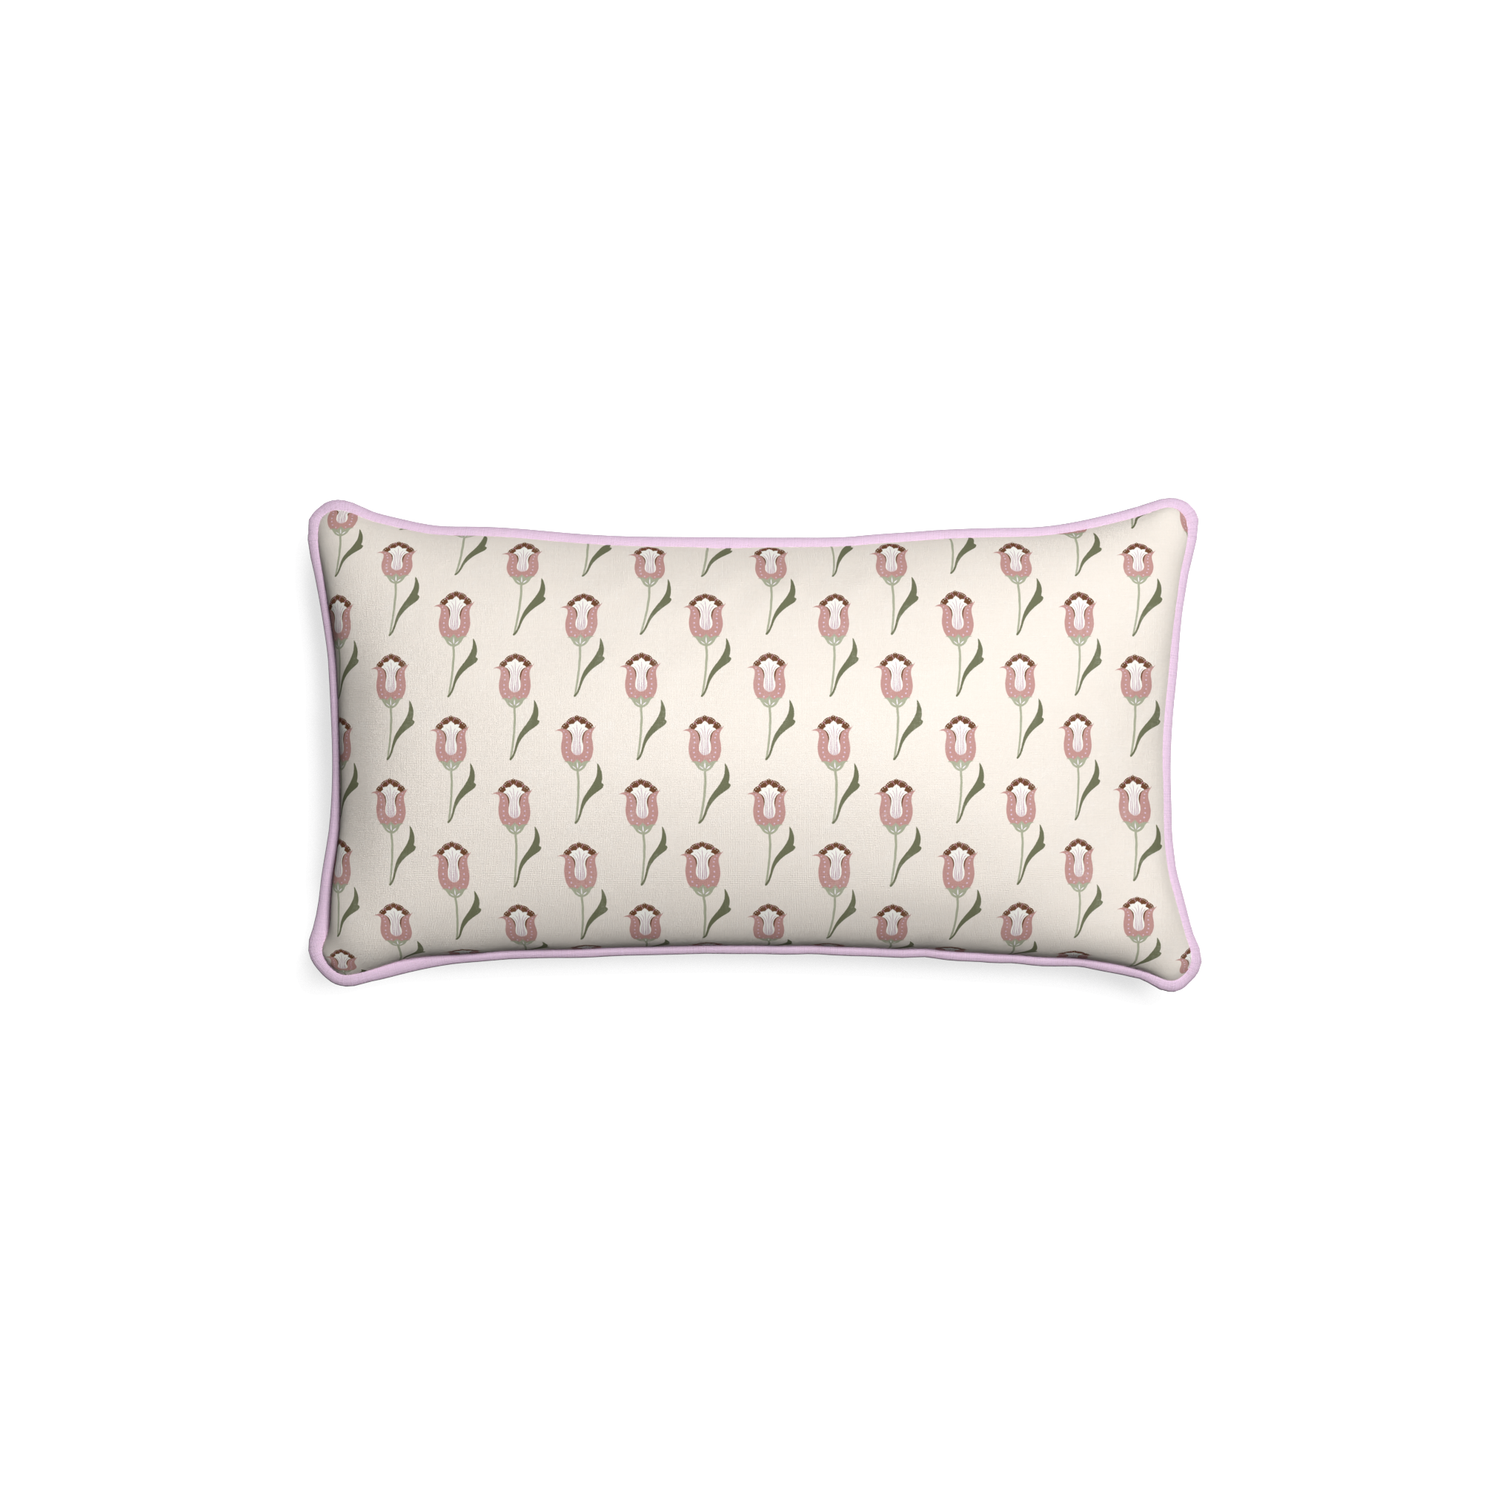 Petite-lumbar annabelle orchid custom pink tulippillow with l piping on white background